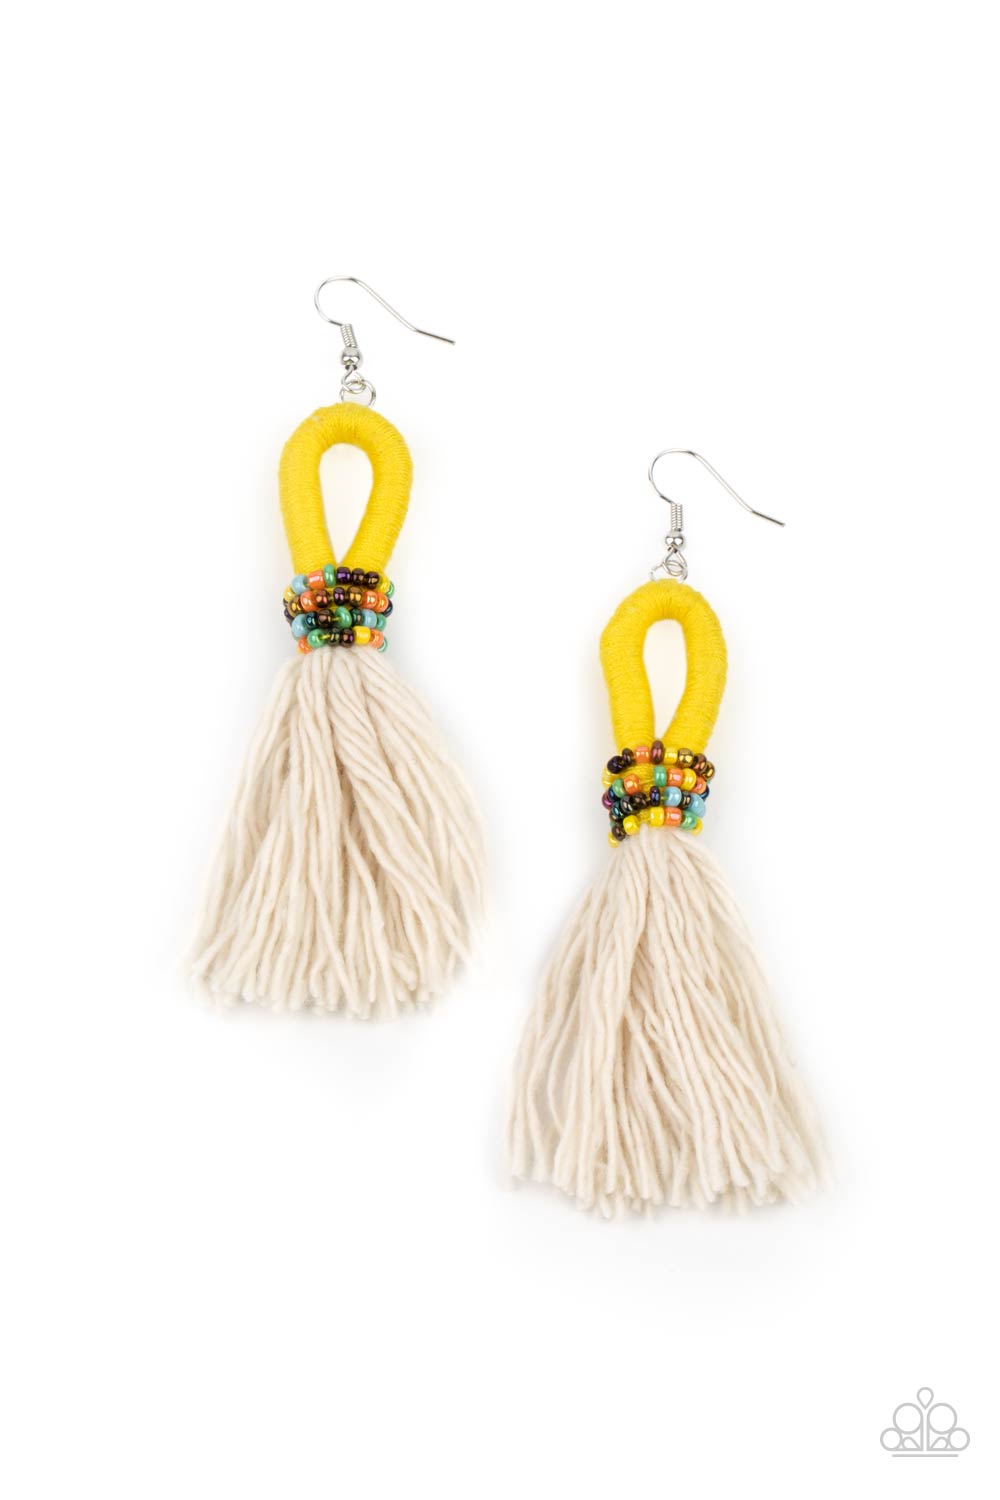 The Dustup Yellow Earring - Paparazzi Accessories  A tassel of soft white cotton fans out under rows of brightly colored seed beads. Anchored by a loop of vibrant yellow floss, the eye-catching style swings from the ear for a show-stopping statement. Earring attaches to a standard fishhook fitting.  All Paparazzi Accessories are lead free and nickel free!  Sold as one pair of earrings.